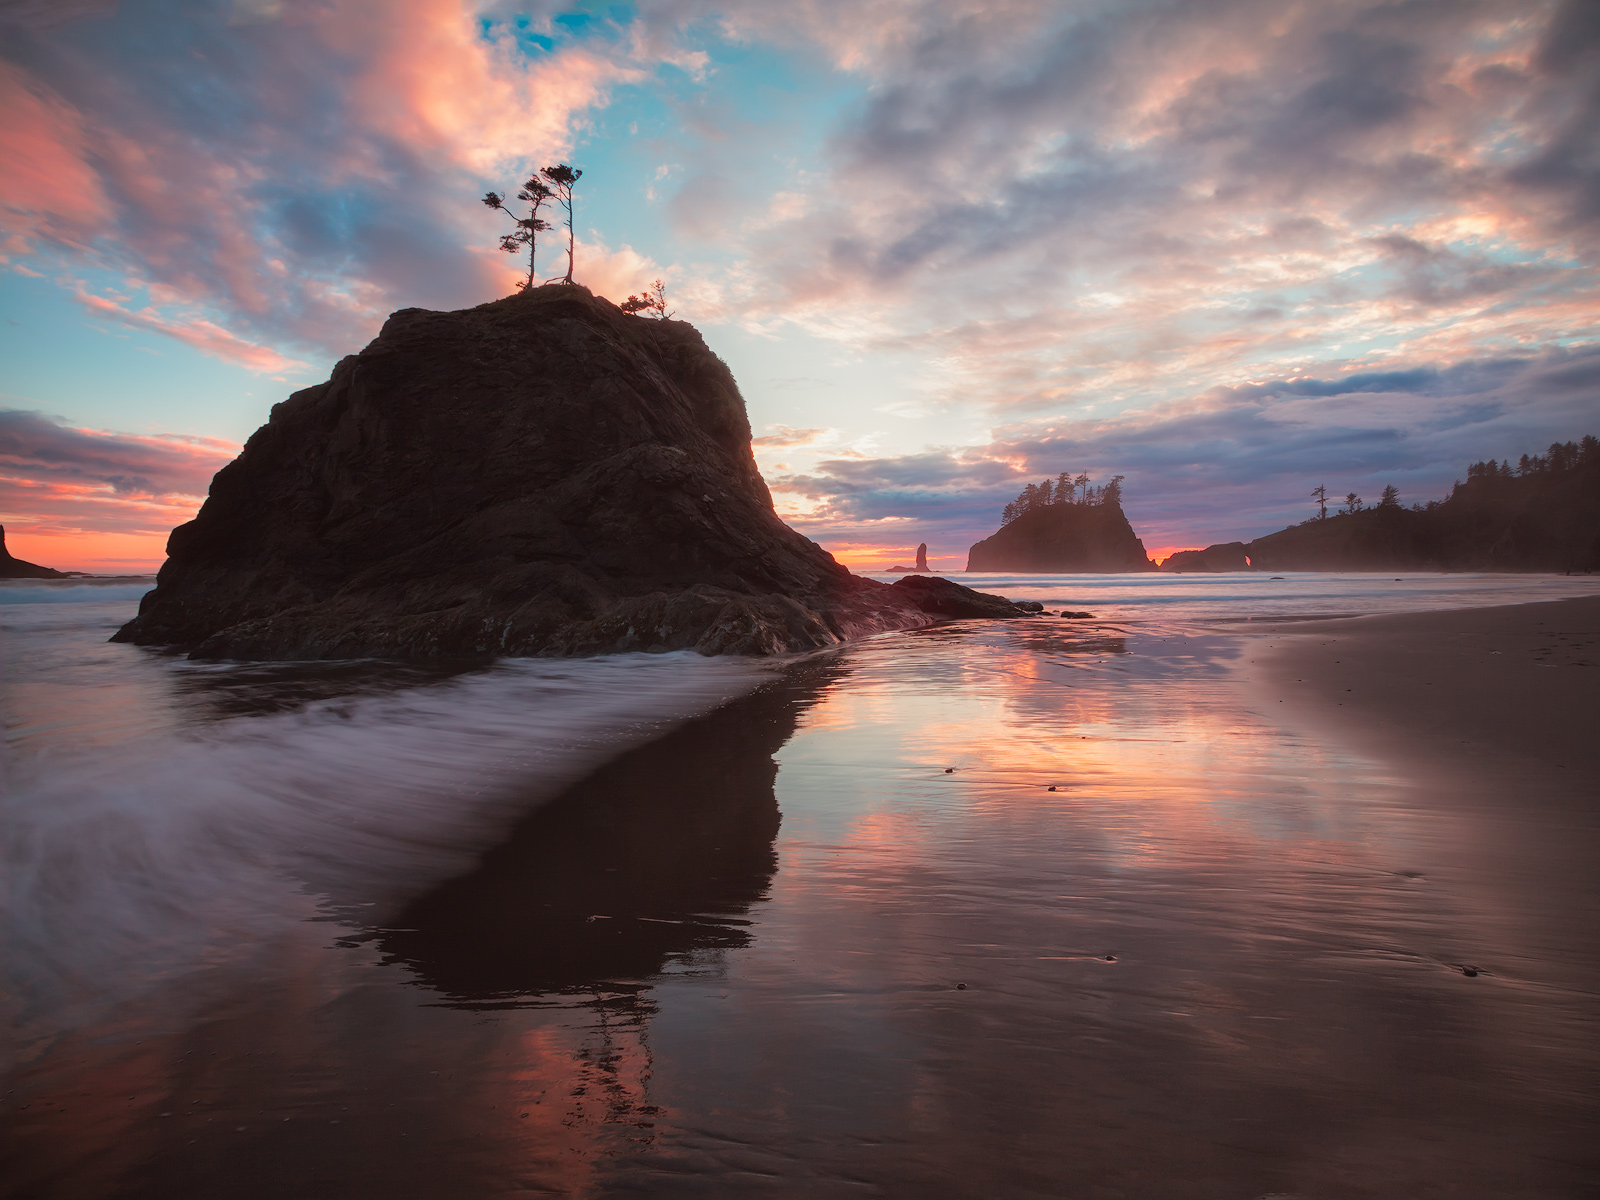 Sea stacks at Second Beach surrounded by reflections of the sunset in the retreating waters